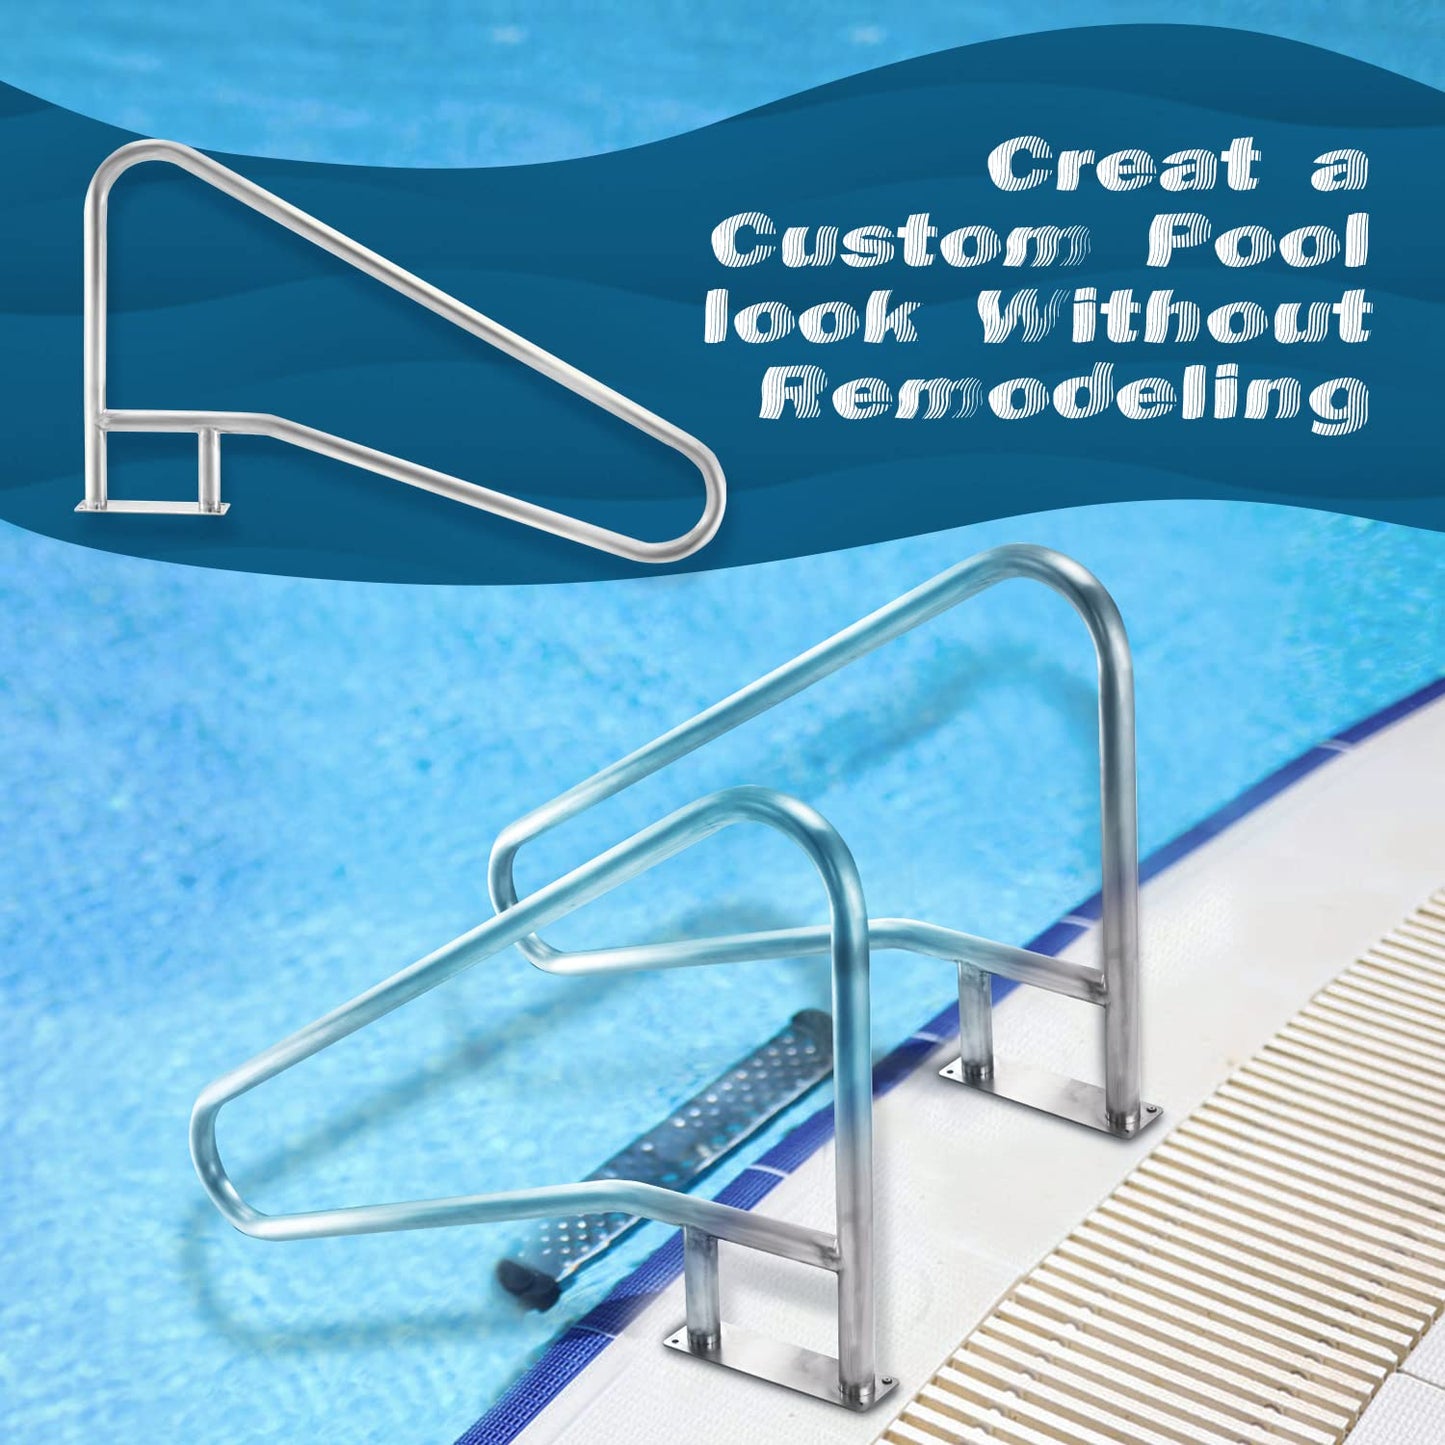 YOLENY Pool Handrail, 55"X32" 4-Bend Pool Stair Rail 1PC, 440lbs Load Capacity 304 Stainless Steel Pool Railing For Inground Swimming Pool With Blue Nylon Grip Cover Quick Mount Base Plate & Accessory